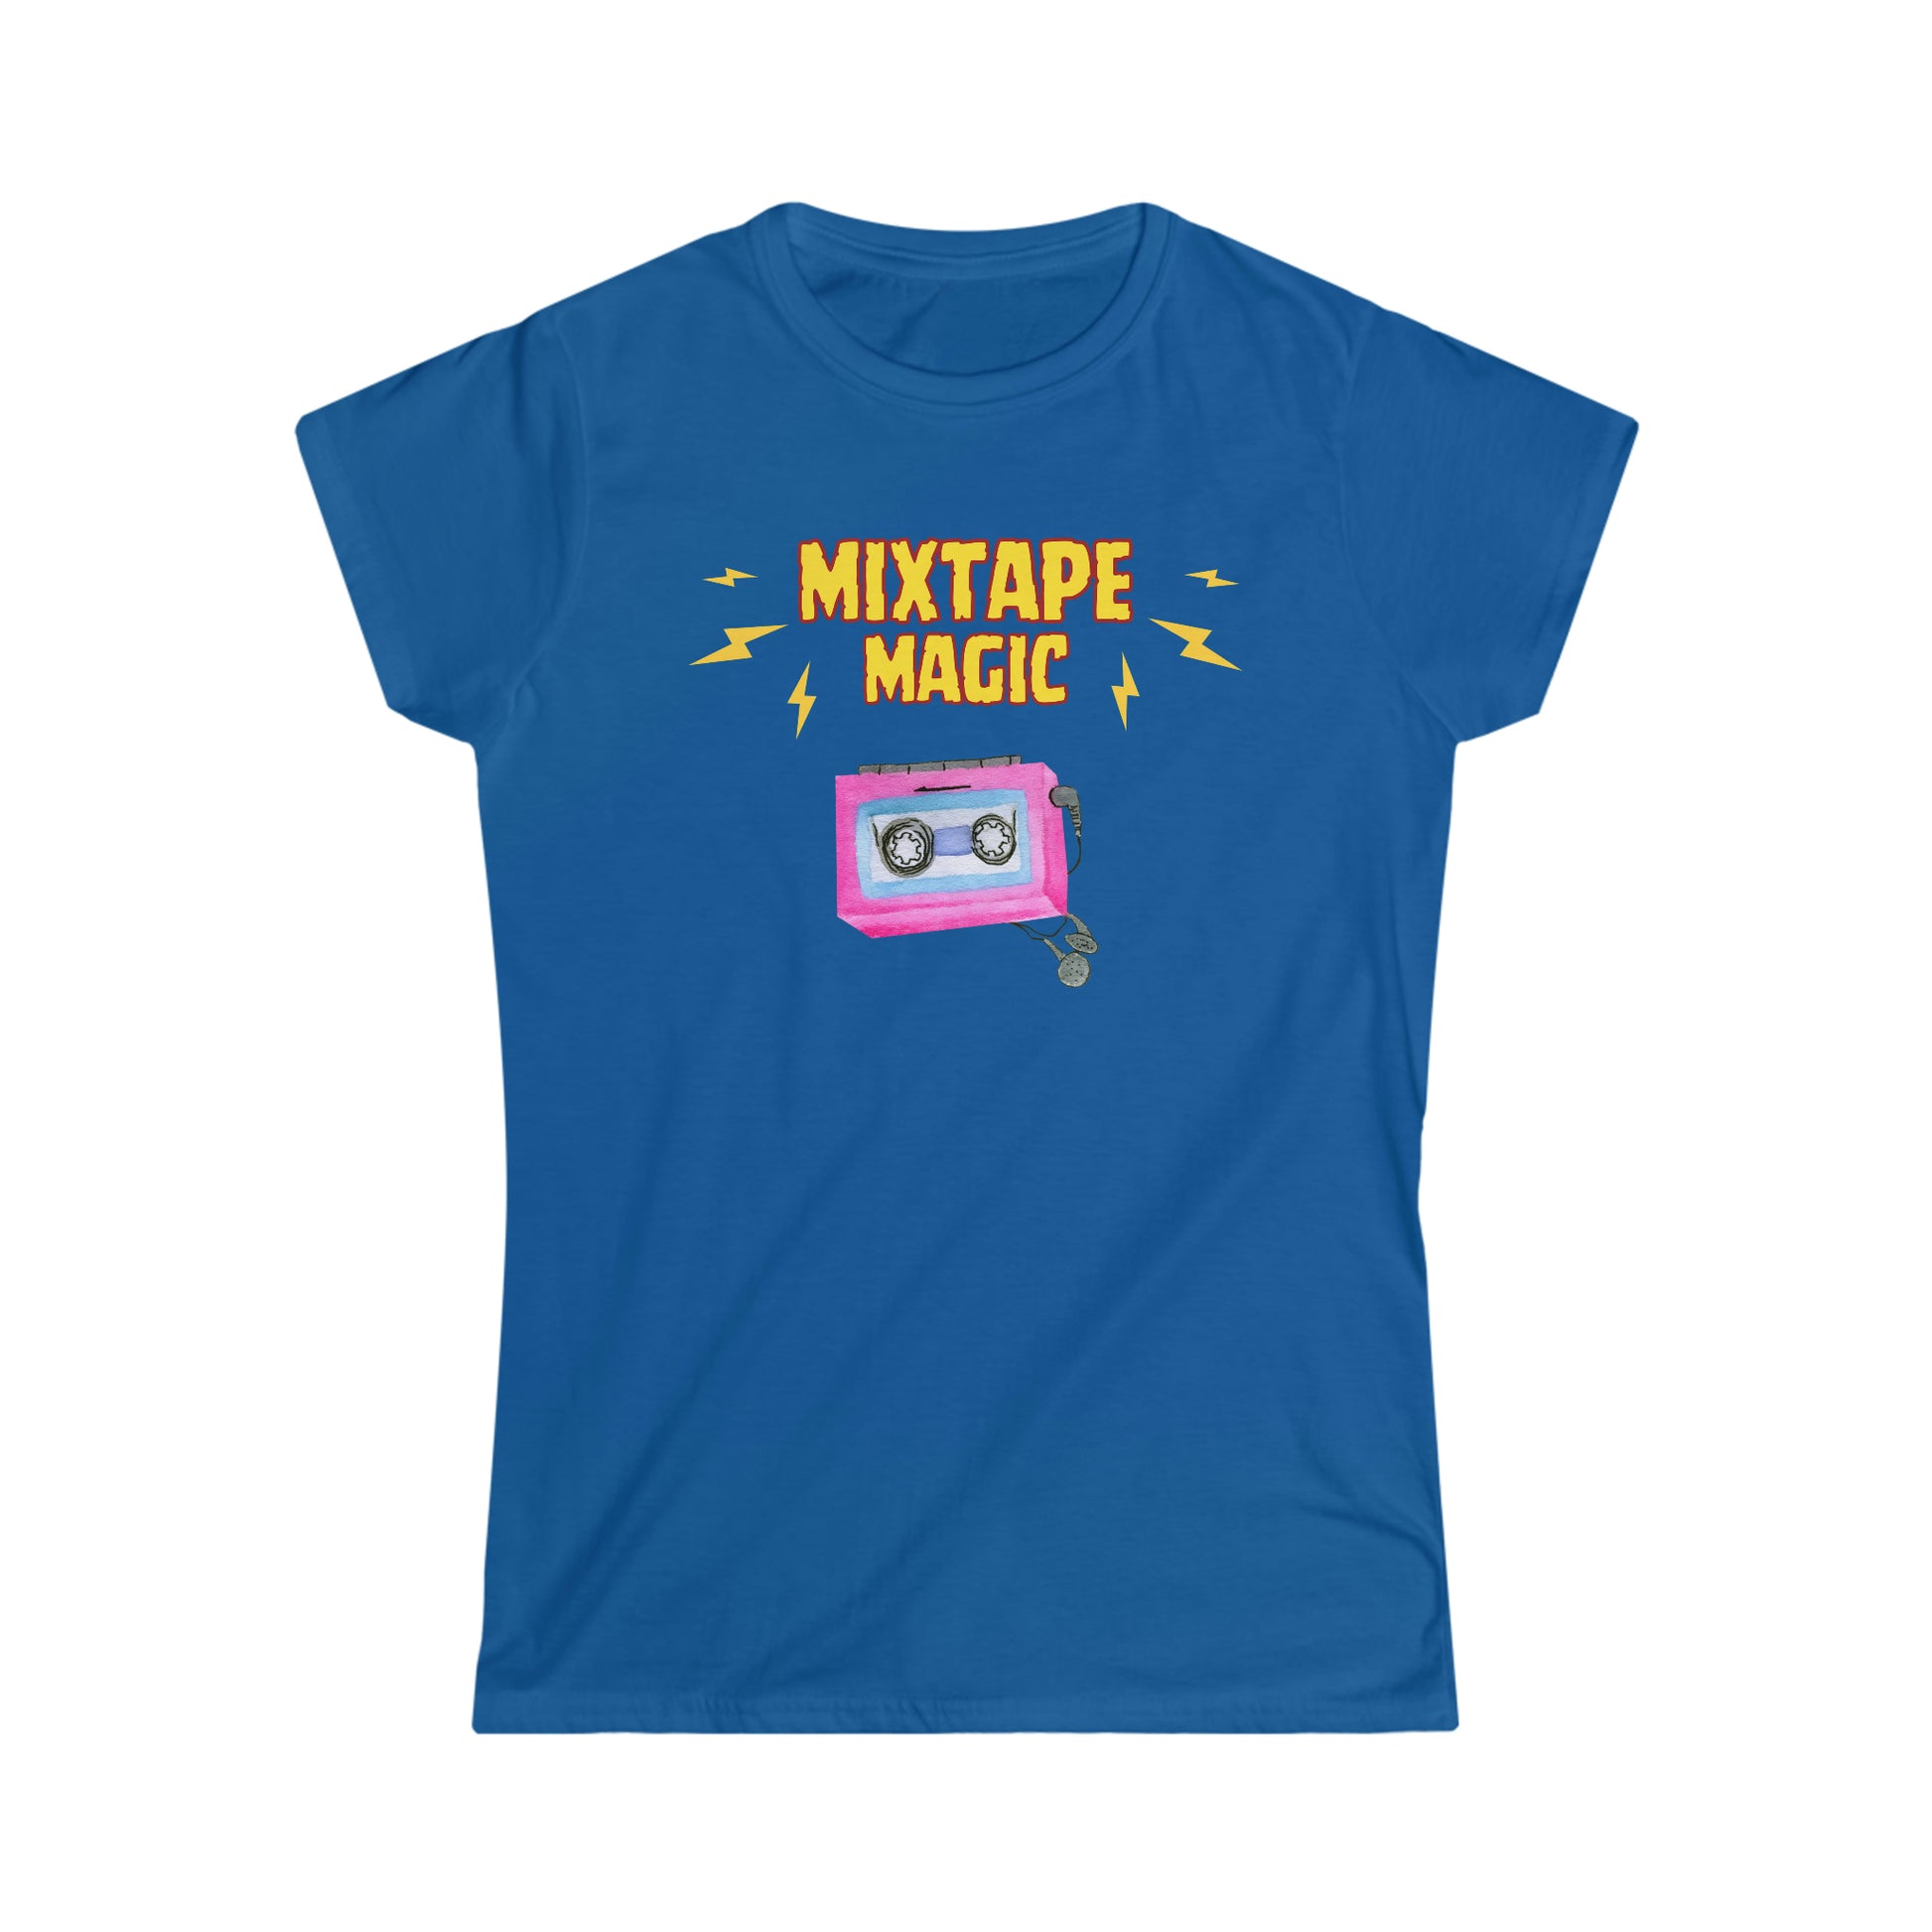 A retro music tshirt with the text "Mixtape magic" and a picture of a cassette player with headphones